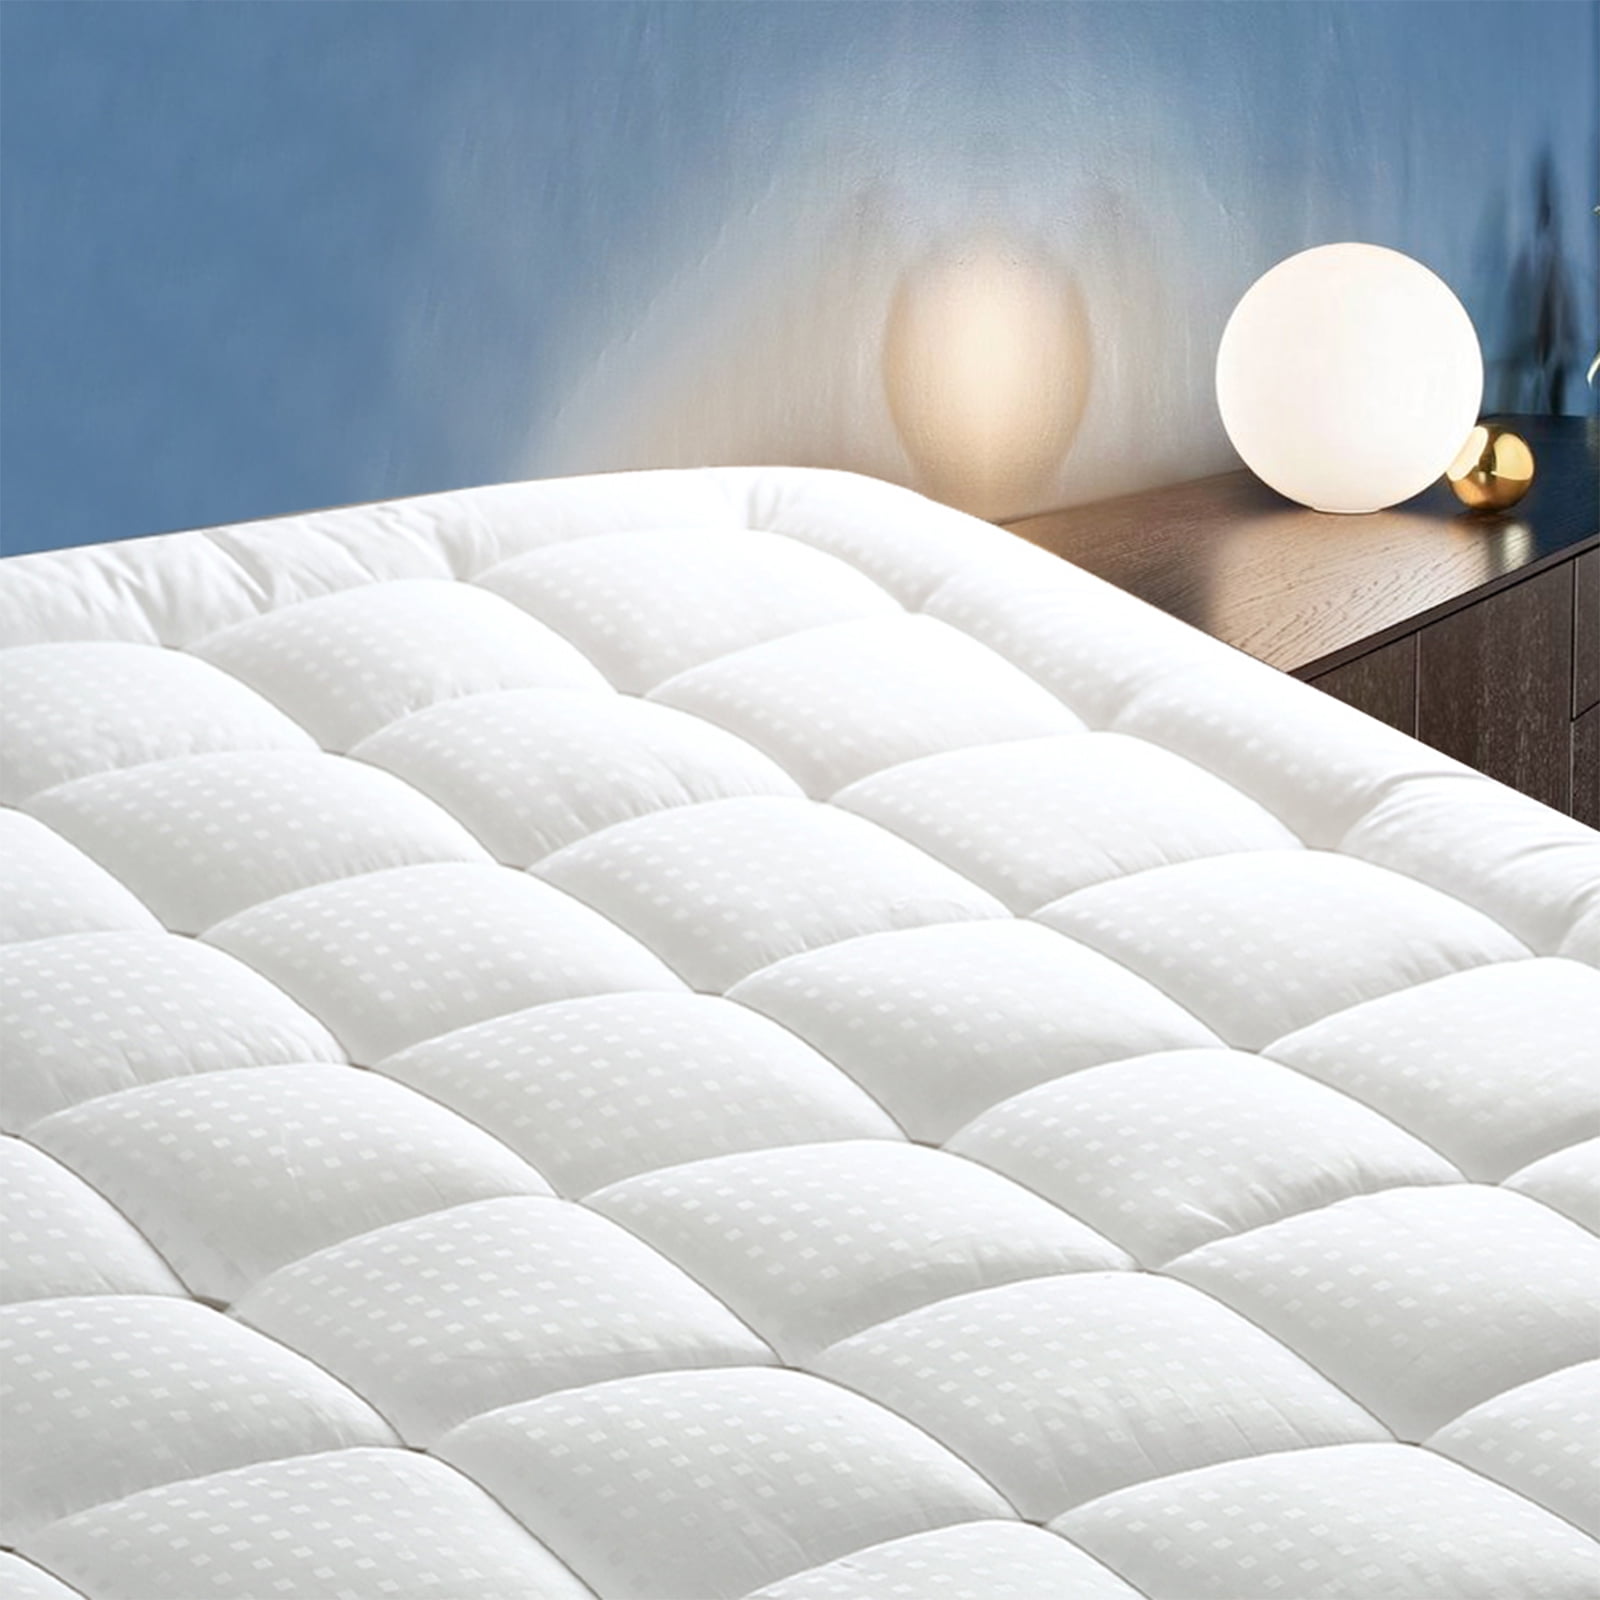 EDILLY Queen Size Quilted Mattress Pad Cover Topper Pillow Top